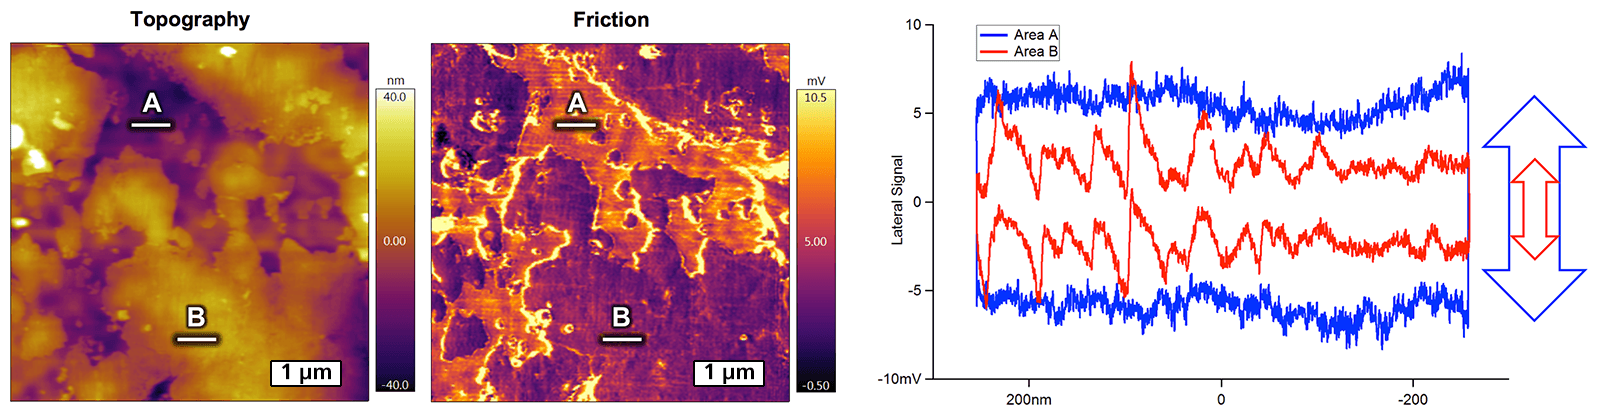 Topographic and friction images of a tribofilm after one hour with corresponding friction loops